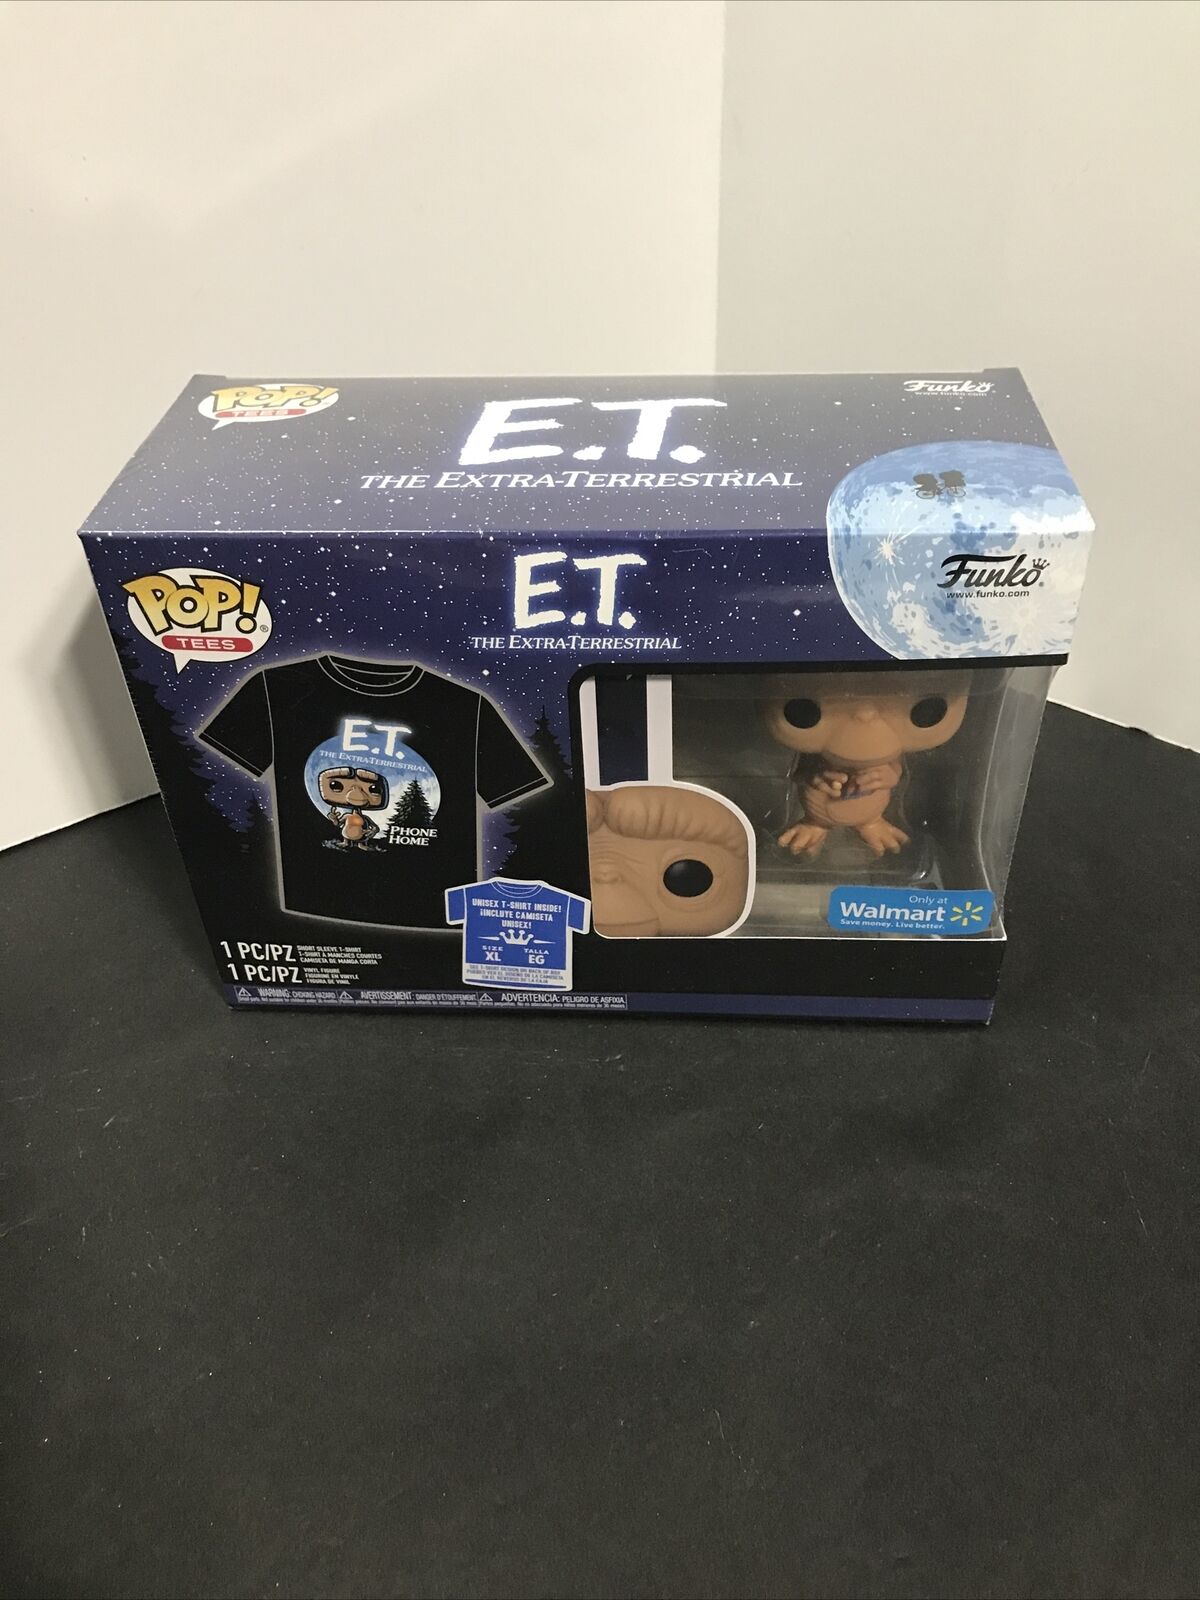 Funko POP Tees E.T. The Extra Terrestrial XL T-Shirt & Walmart Exclusive SEALED